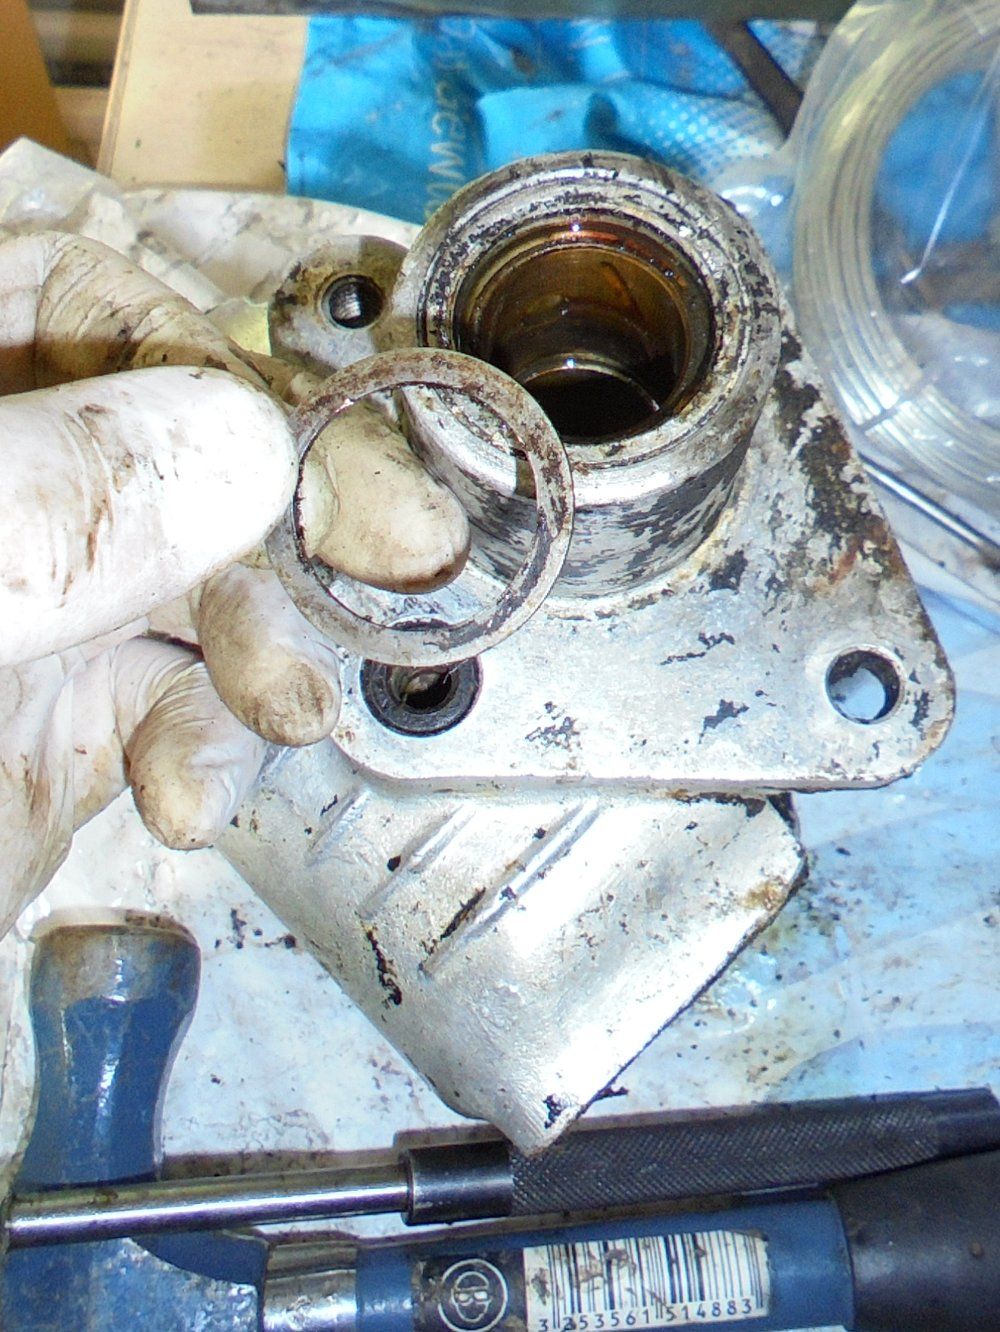 1965 series 2a station wagon removal of output shaft bushing on steeringbox2.JPG